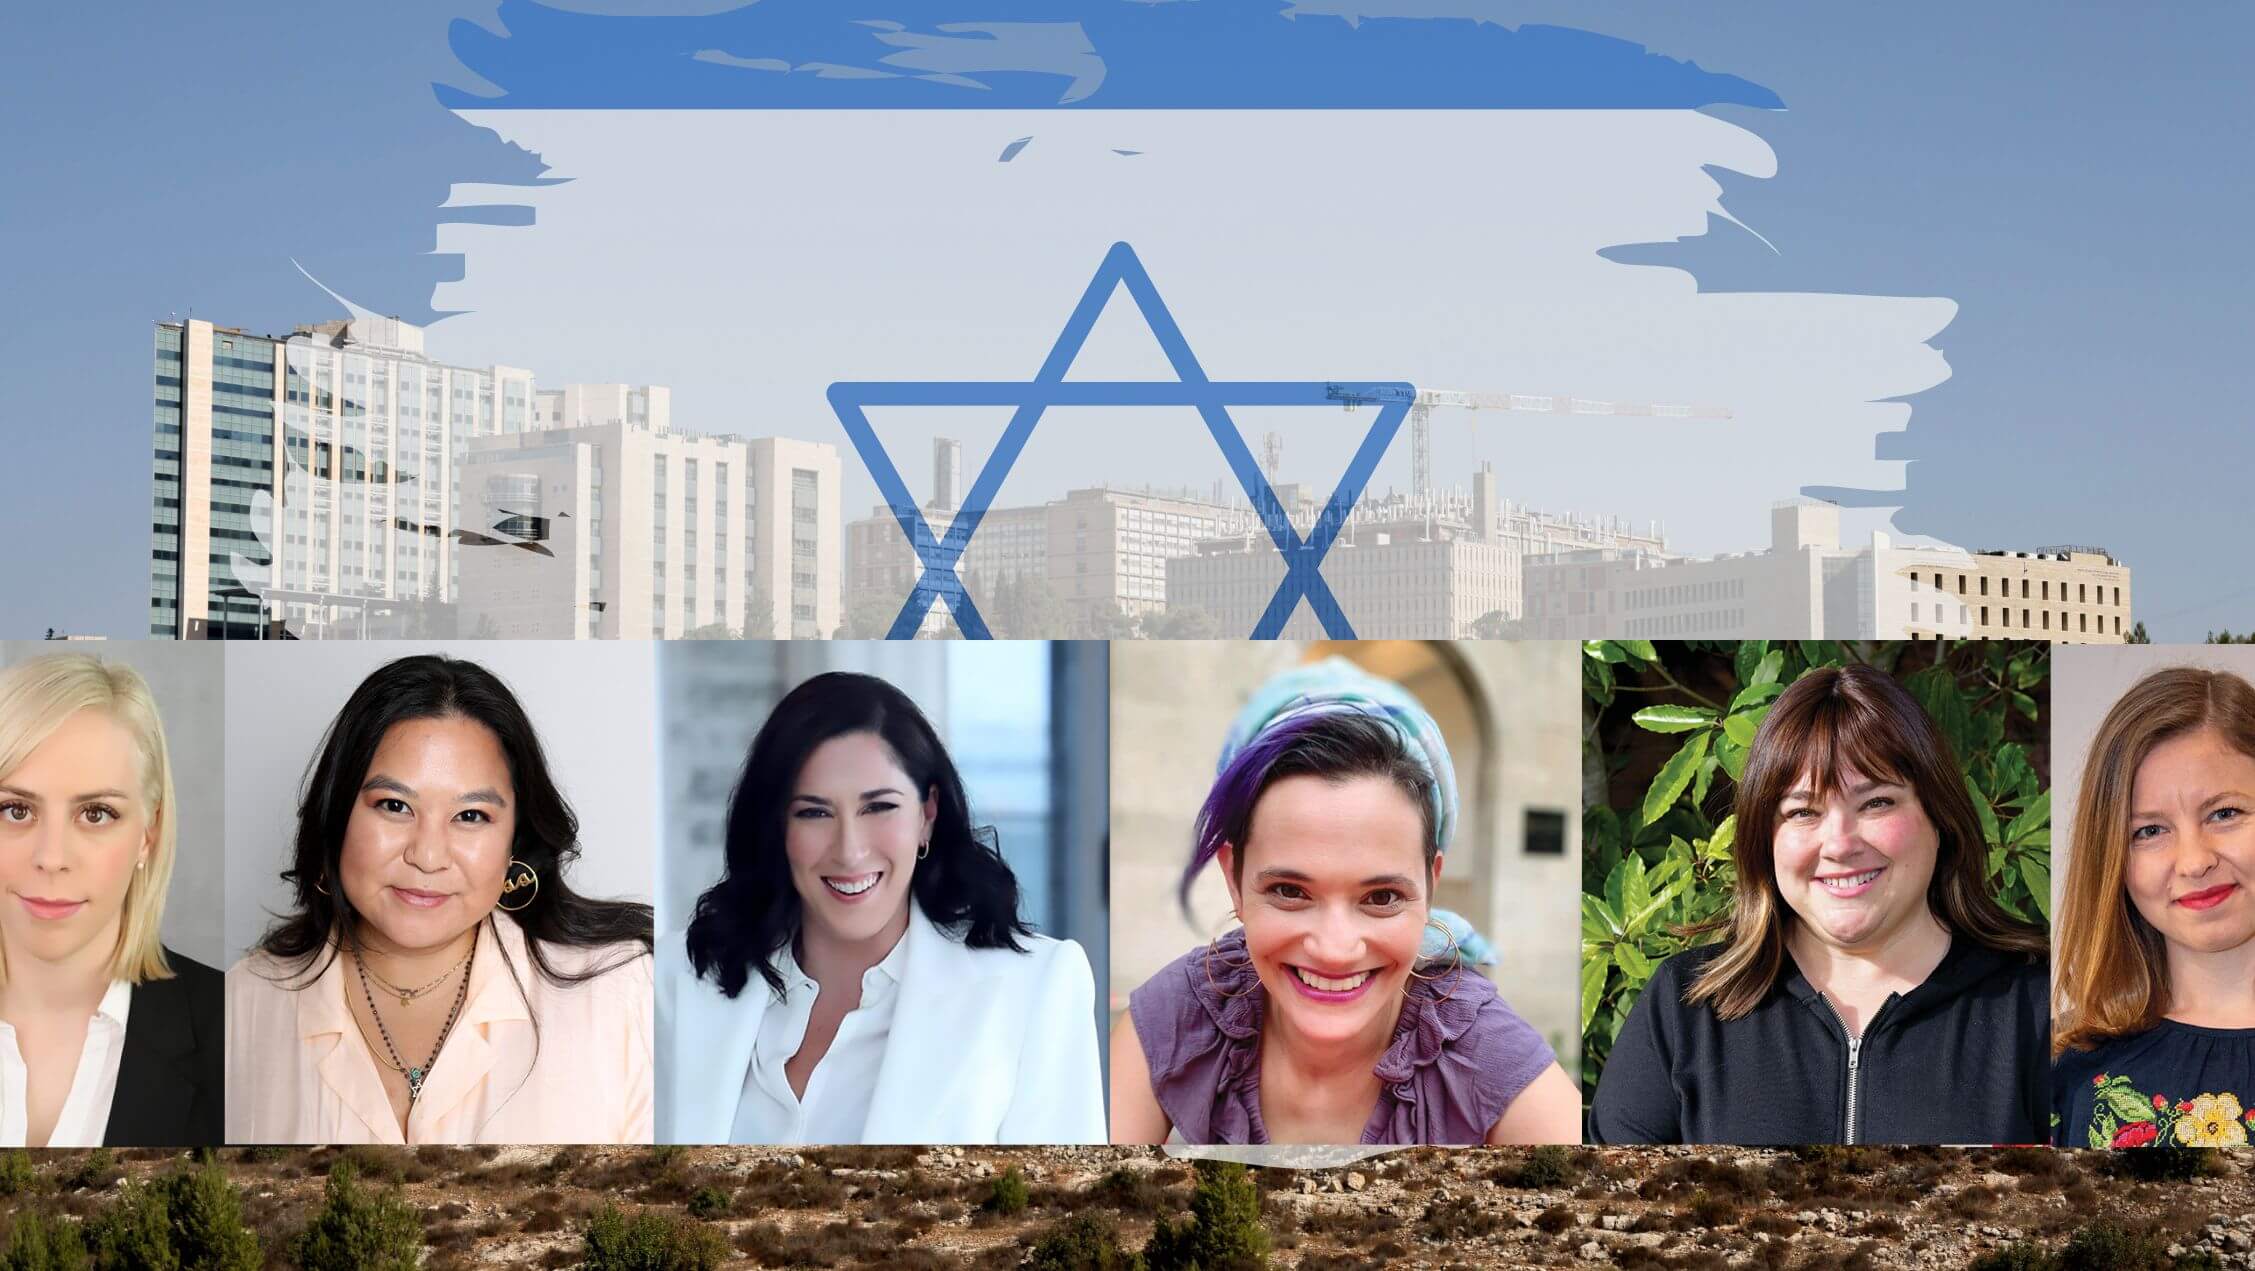 Hadassah's Jerusalem hospital, along with some of the featured women. Left to right: Emily Schrader, Amy Albertson, Leah Soibel, Naava Shafner, ChayaLeah Safrin and Ana Sazanov.